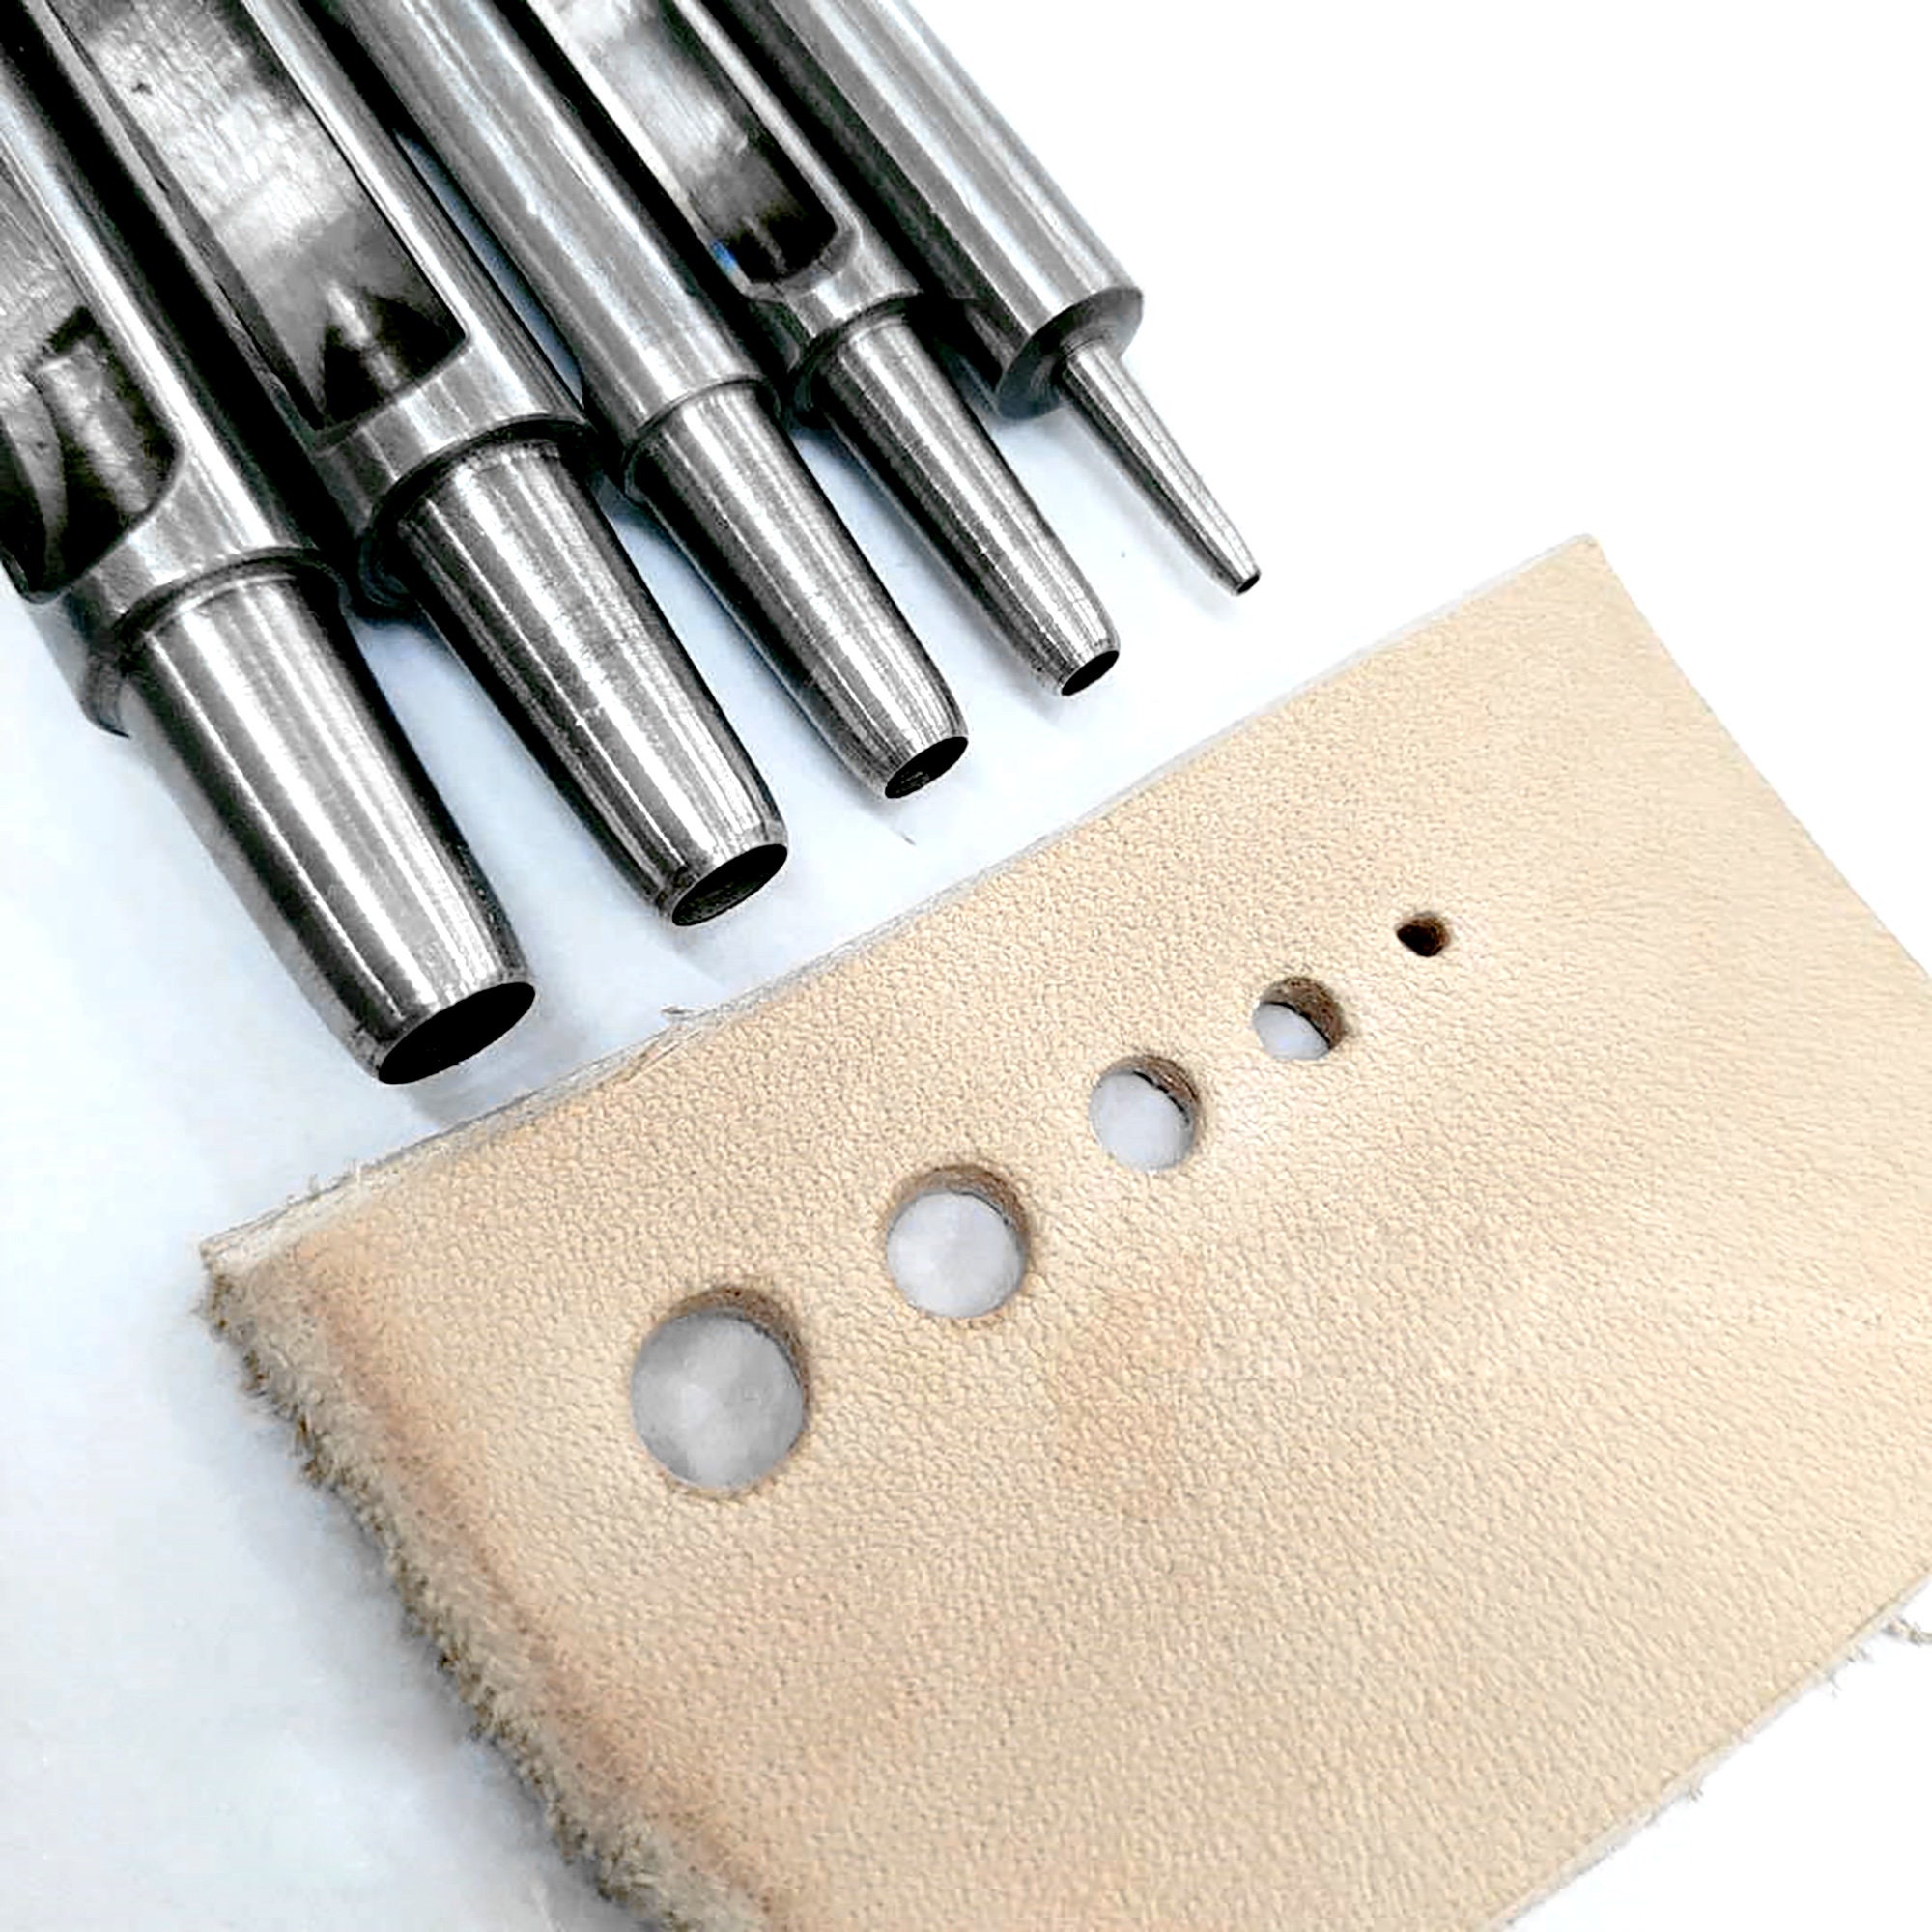 15Pcs Leather Cutting Dies Set Hole Hollow Cutter Tool Metal Style Leather